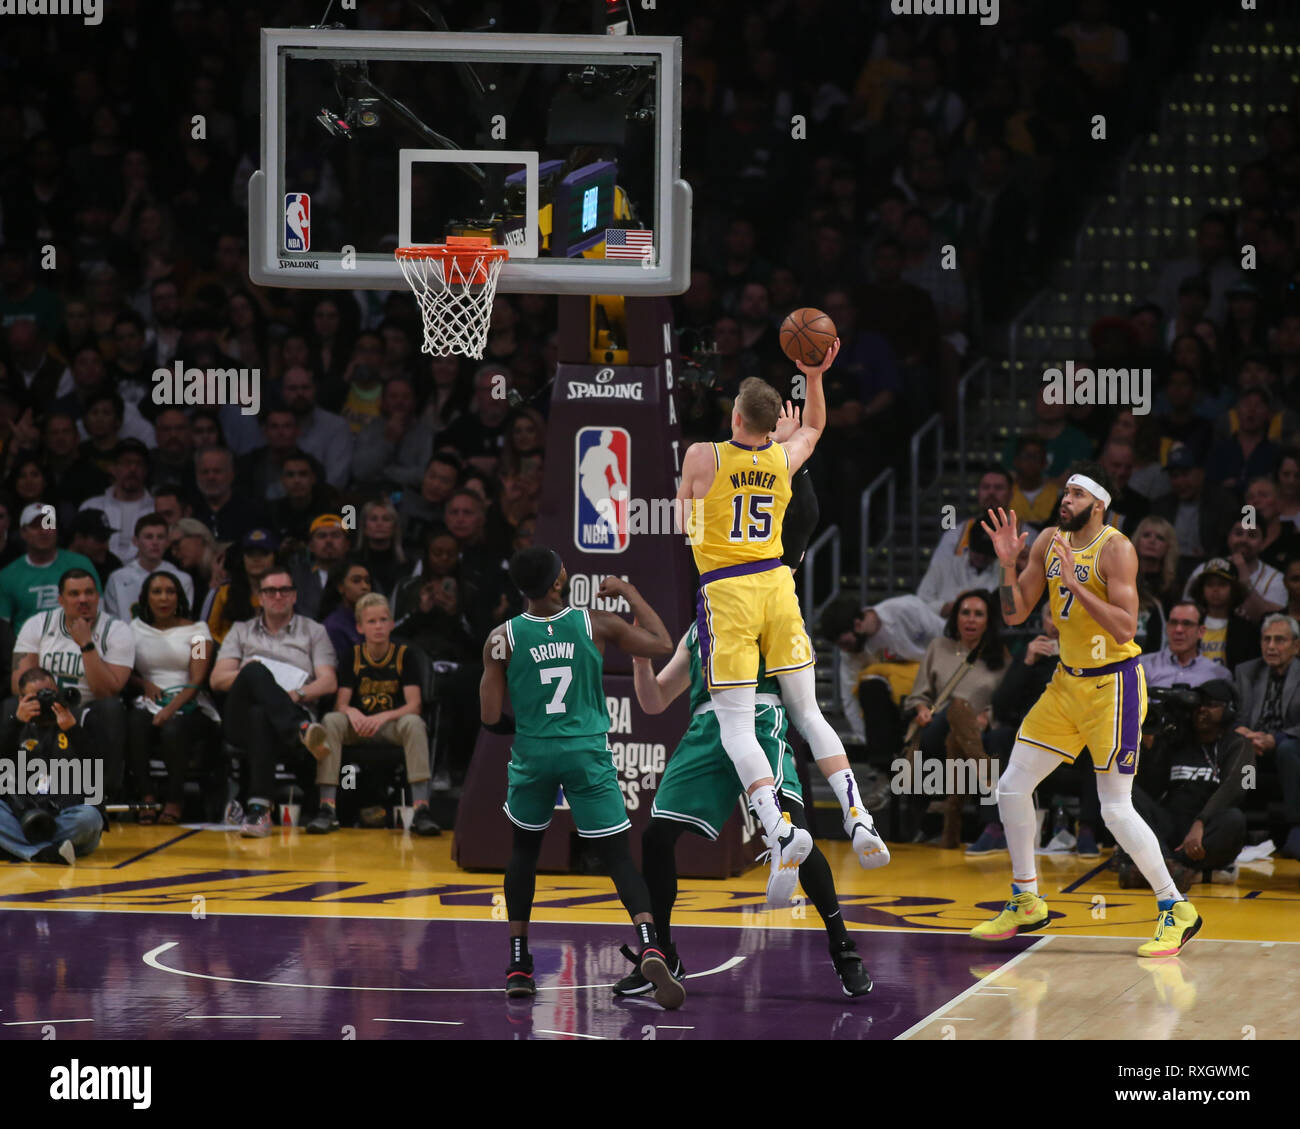 Los Angeles Lakers center Moritz Wagner #15 shooting a flooter during the Boston Celtics vs Los Angeles Lakers game at Staples Center in Los Angeles, CA on March 09, 2019. (Photo by Jevone Moore) Stock Photo